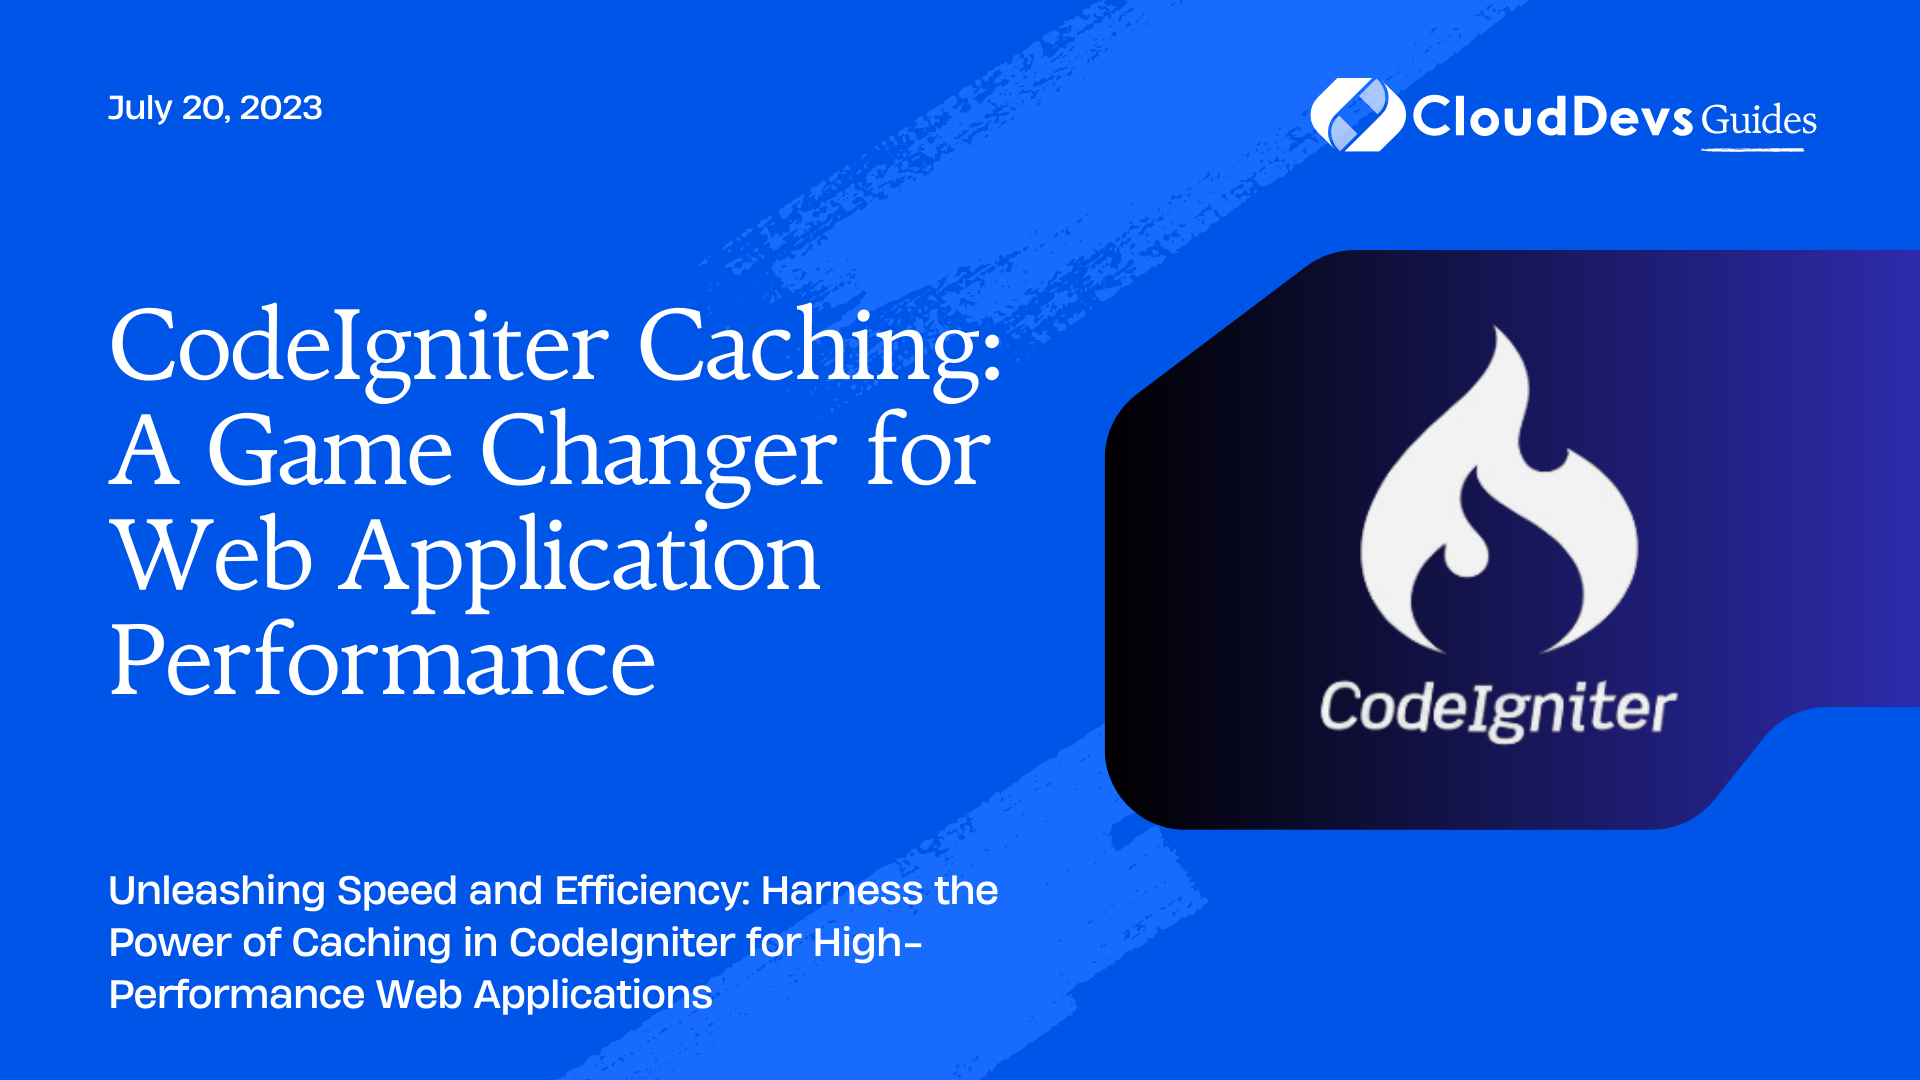 CodeIgniter Caching: A Game Changer for Web Application Performance